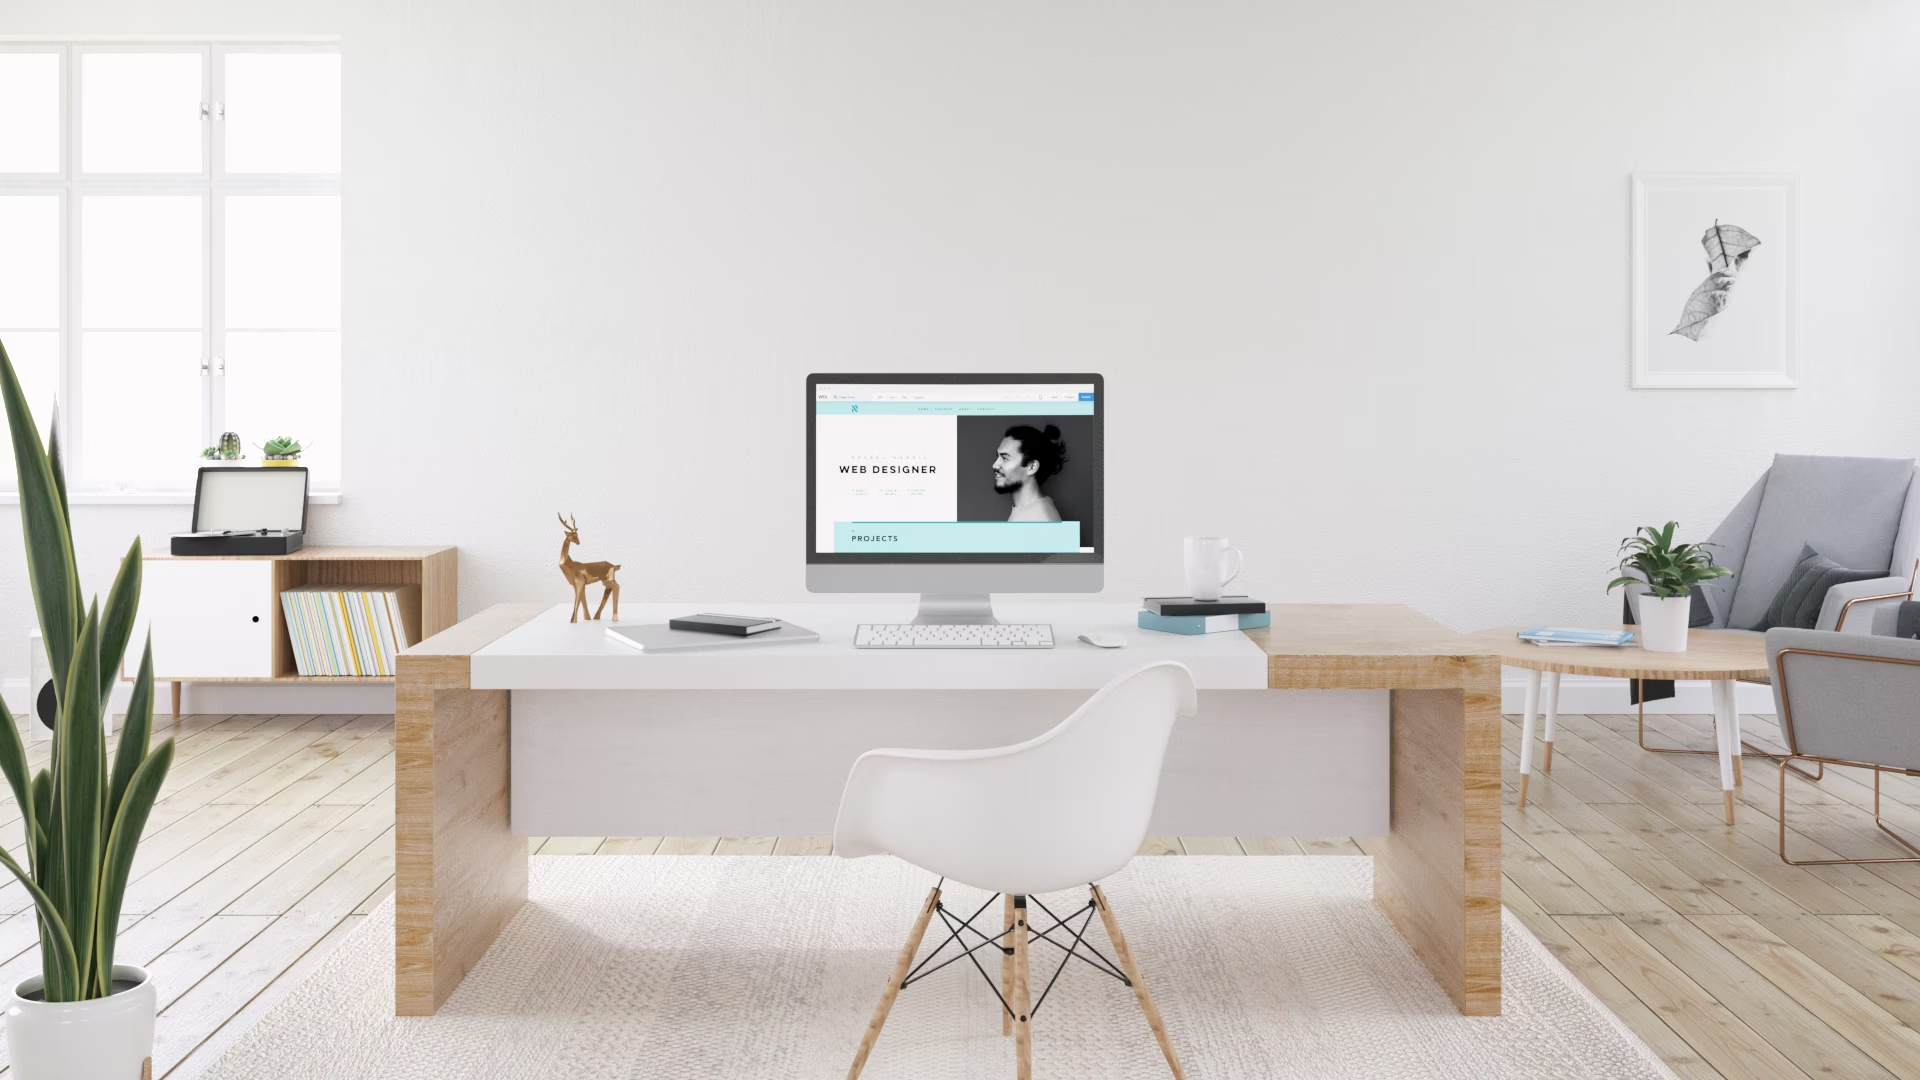 Minimal home office design with sleek desk and chair